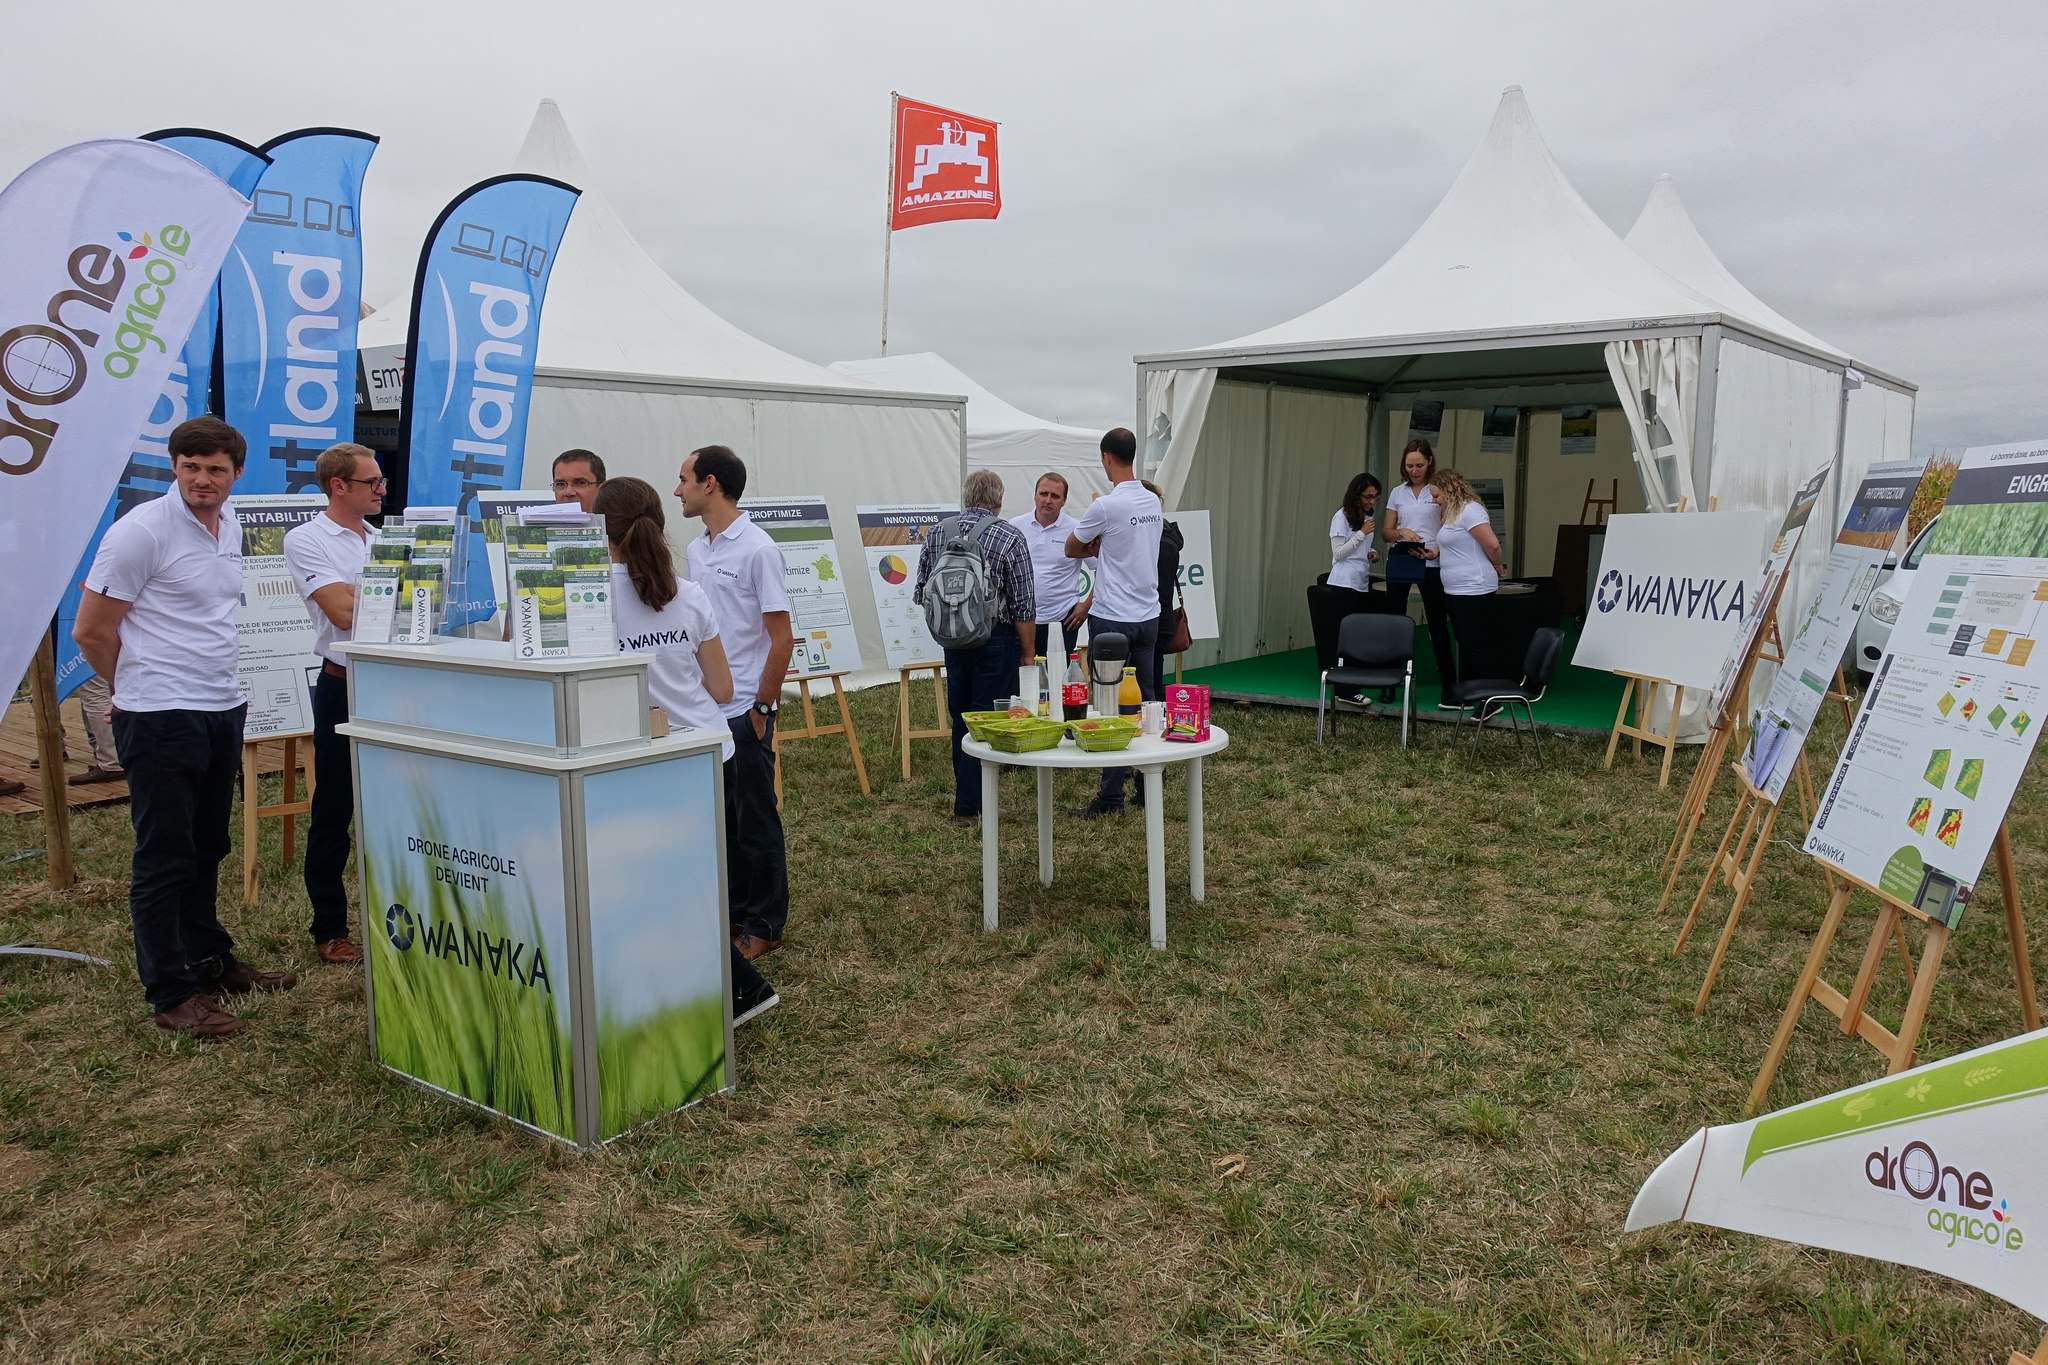 innov agri17 Innov agri 2016 Agriculture show in Outarville, France